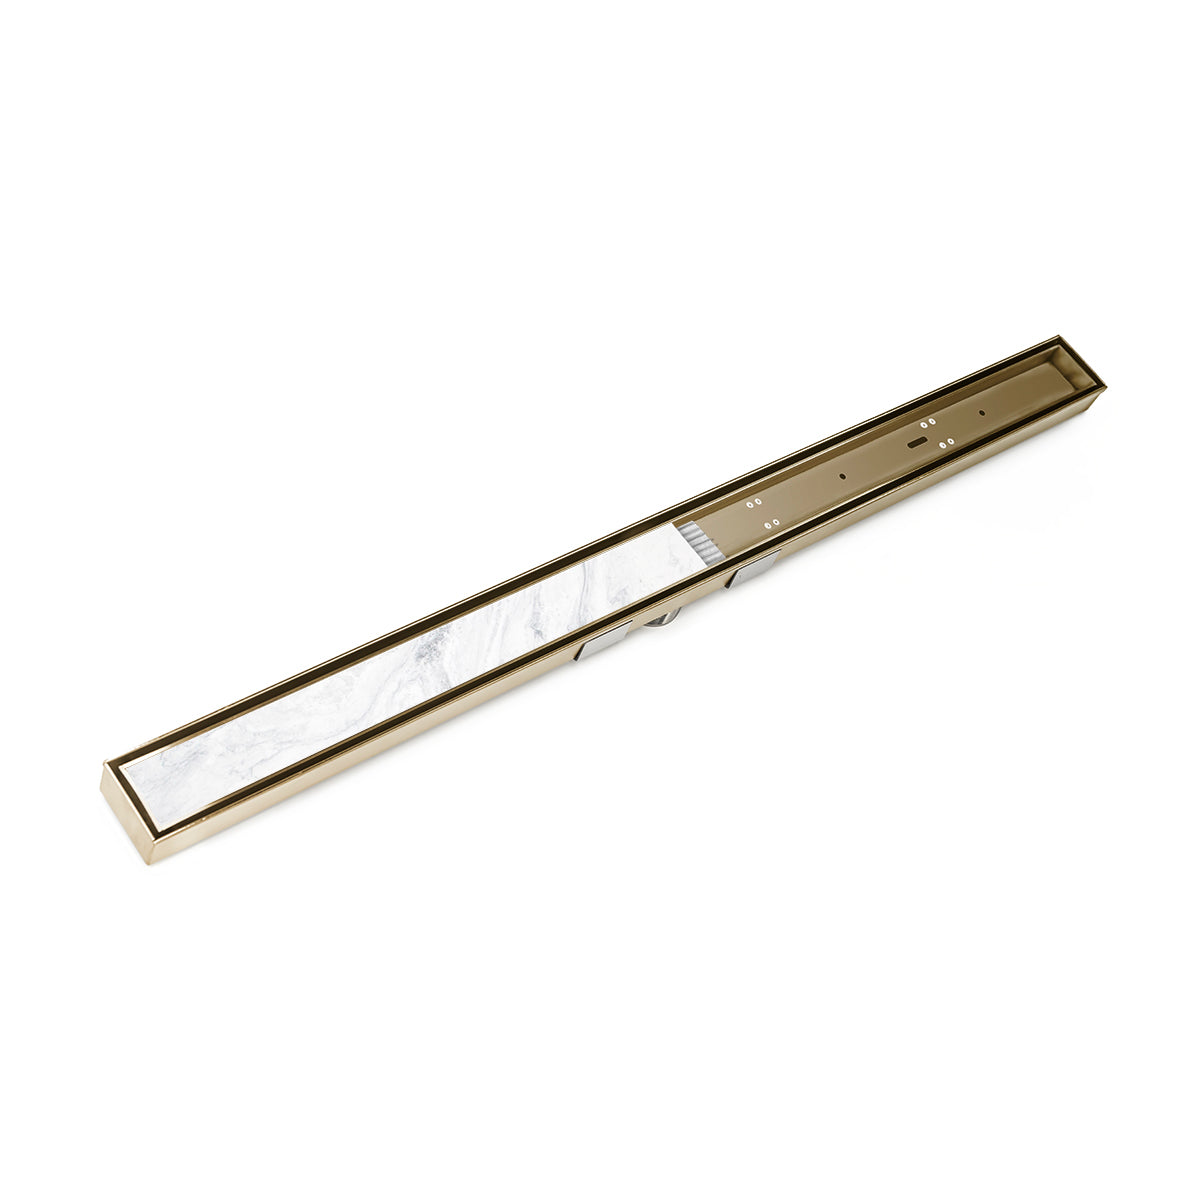 Infinity Drain 96" S-Stainless Steel Series Site Sizable Linear Drain Kit with Tile Insert Frame